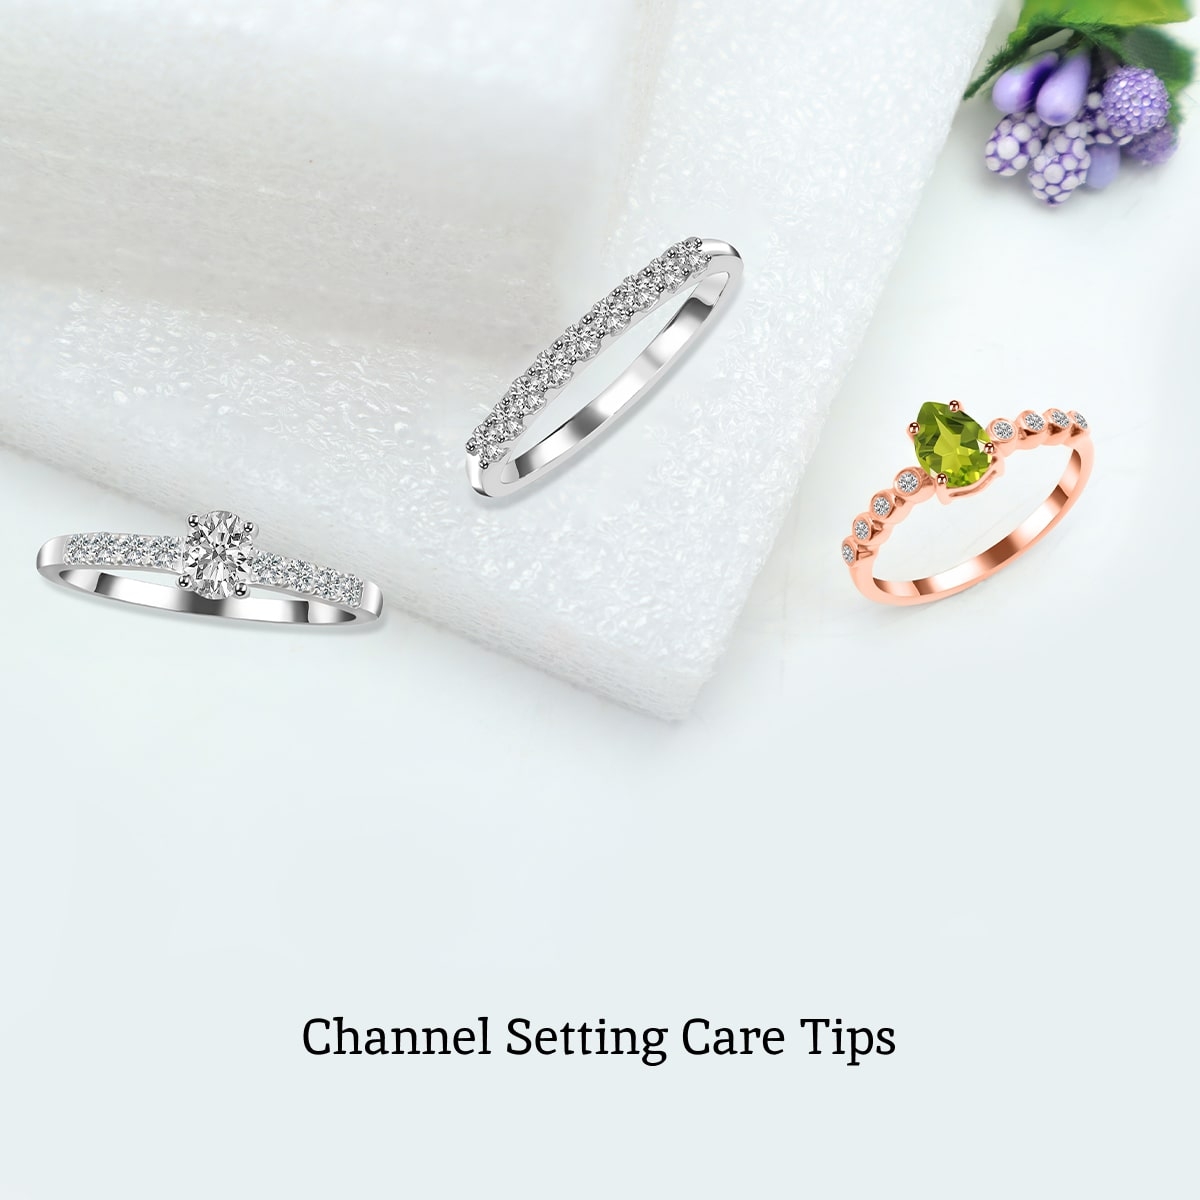 How to Care for a Channel Setting